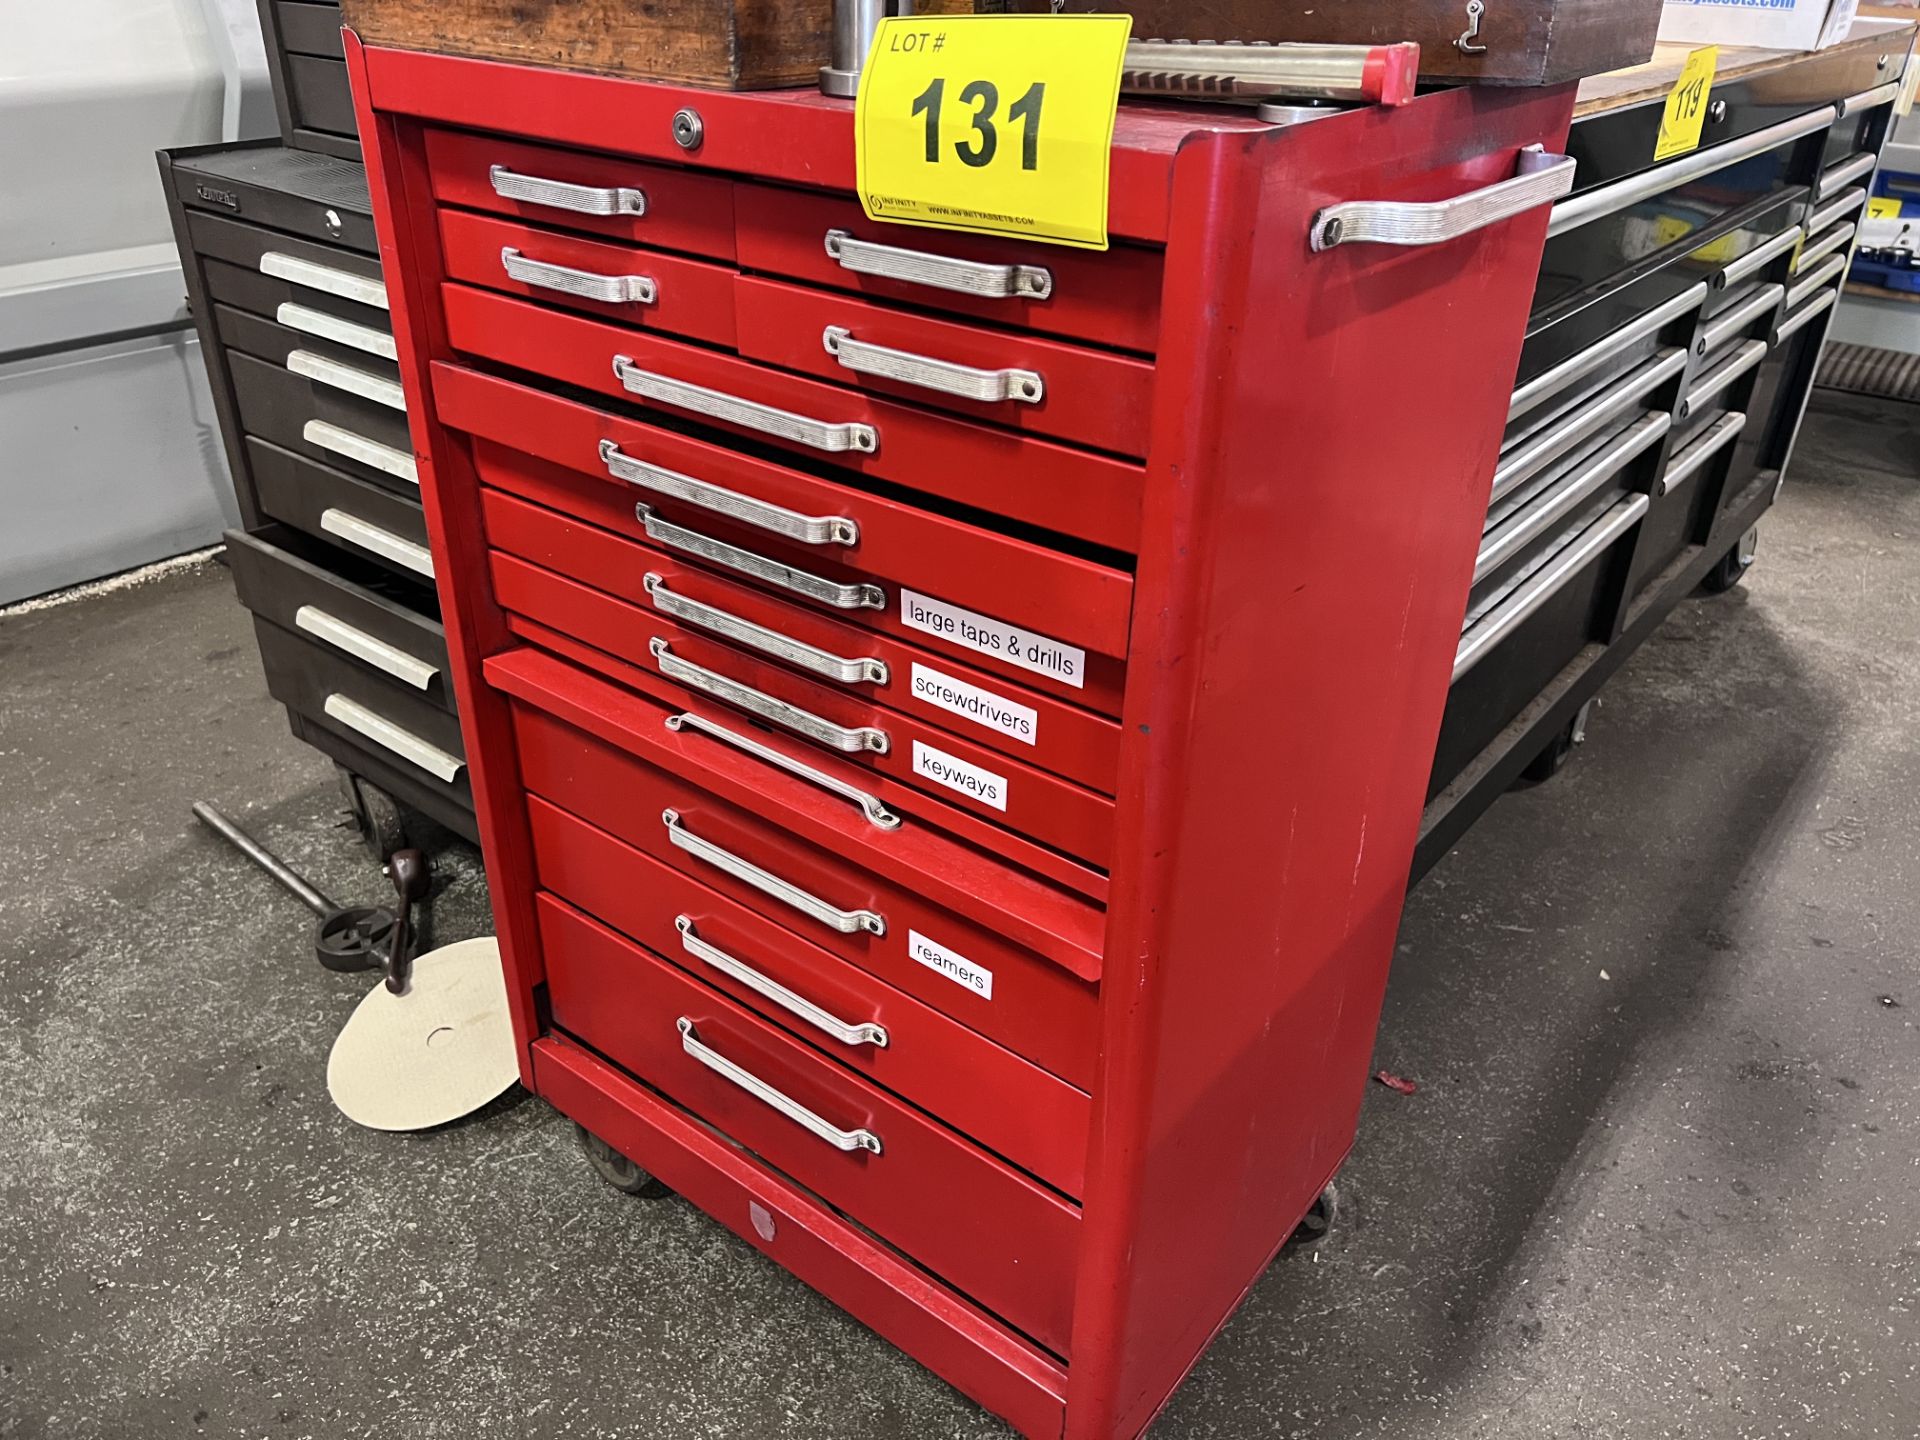 PORTABLE 12-DRAWER TOOL CHEST